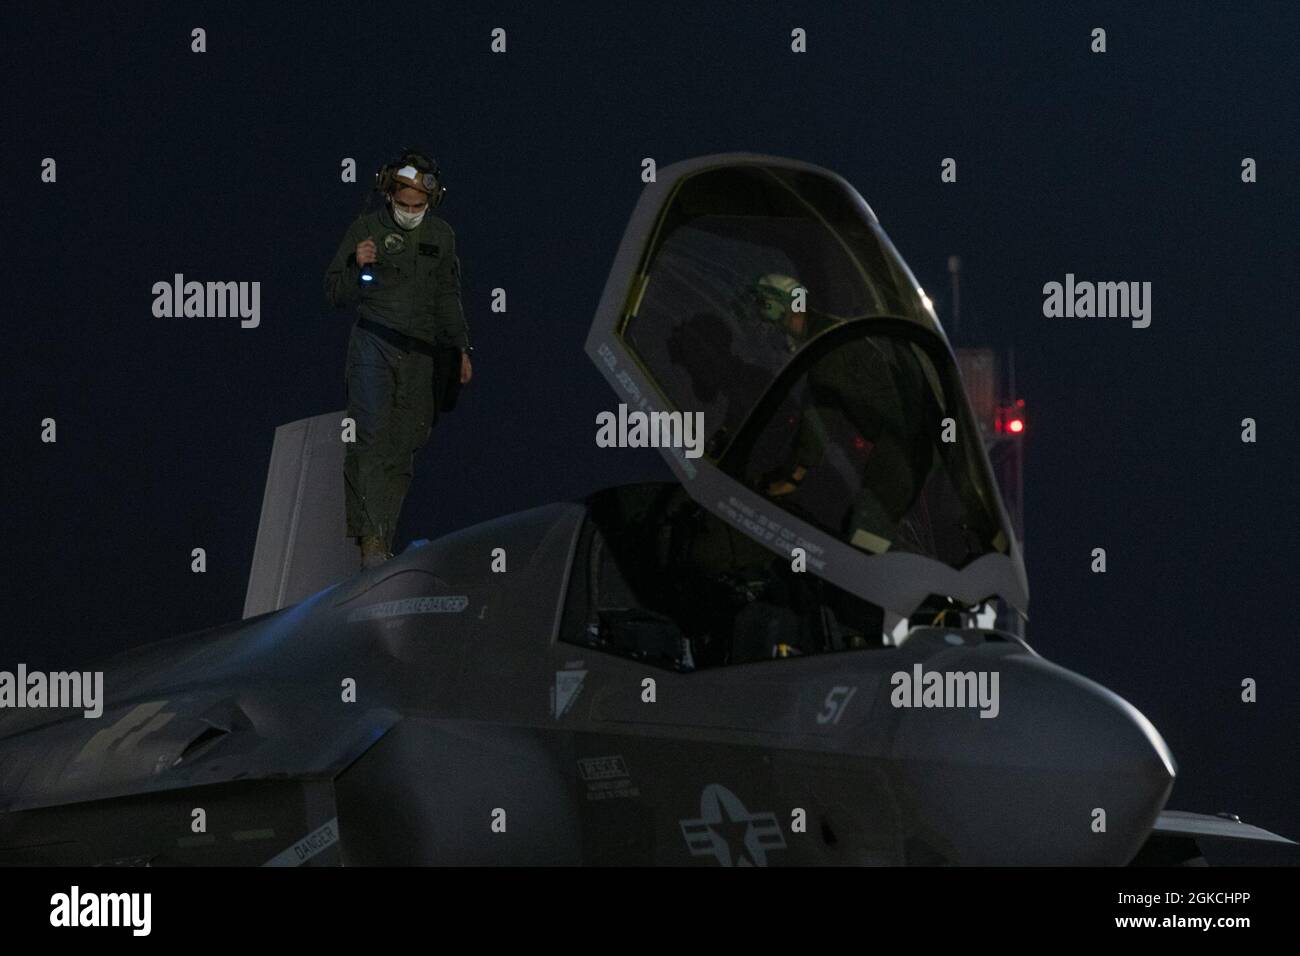 An F-35B Lightning II aircraft, assigned to the Marine Medium Tiltrotor Squadron 164 (Reinforced), 15th Marine Expeditionary Unit, is inspected after landing at Al Udeid Air Base, Qatar, March 2, 2021. The F-35B Lightning II is the United States Marine Corps variant of the 5th generation fighter. Stock Photo